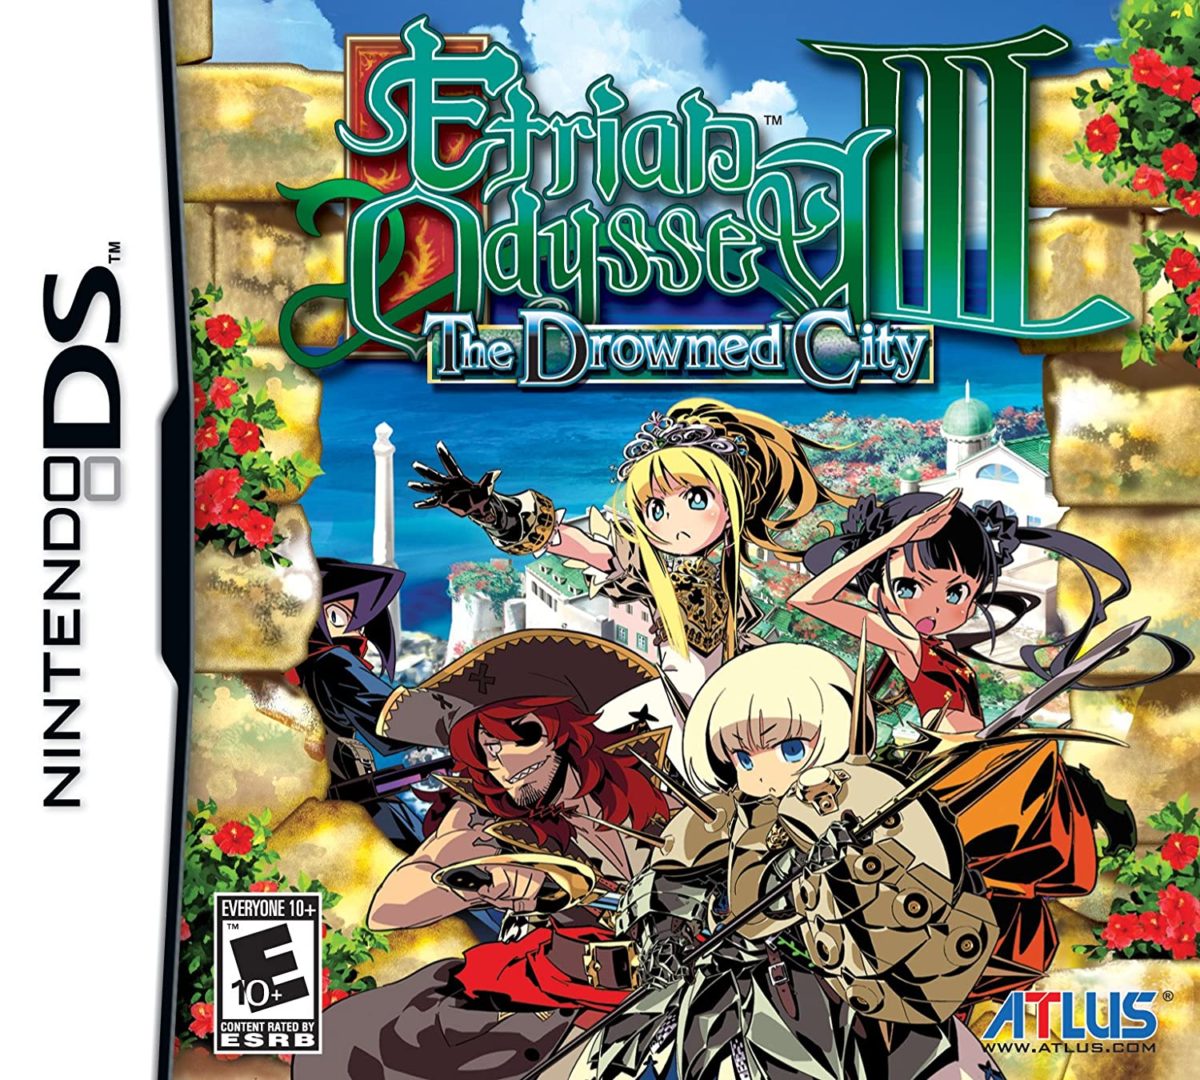 Etrian Odyssey III: The Drowned City player count stats